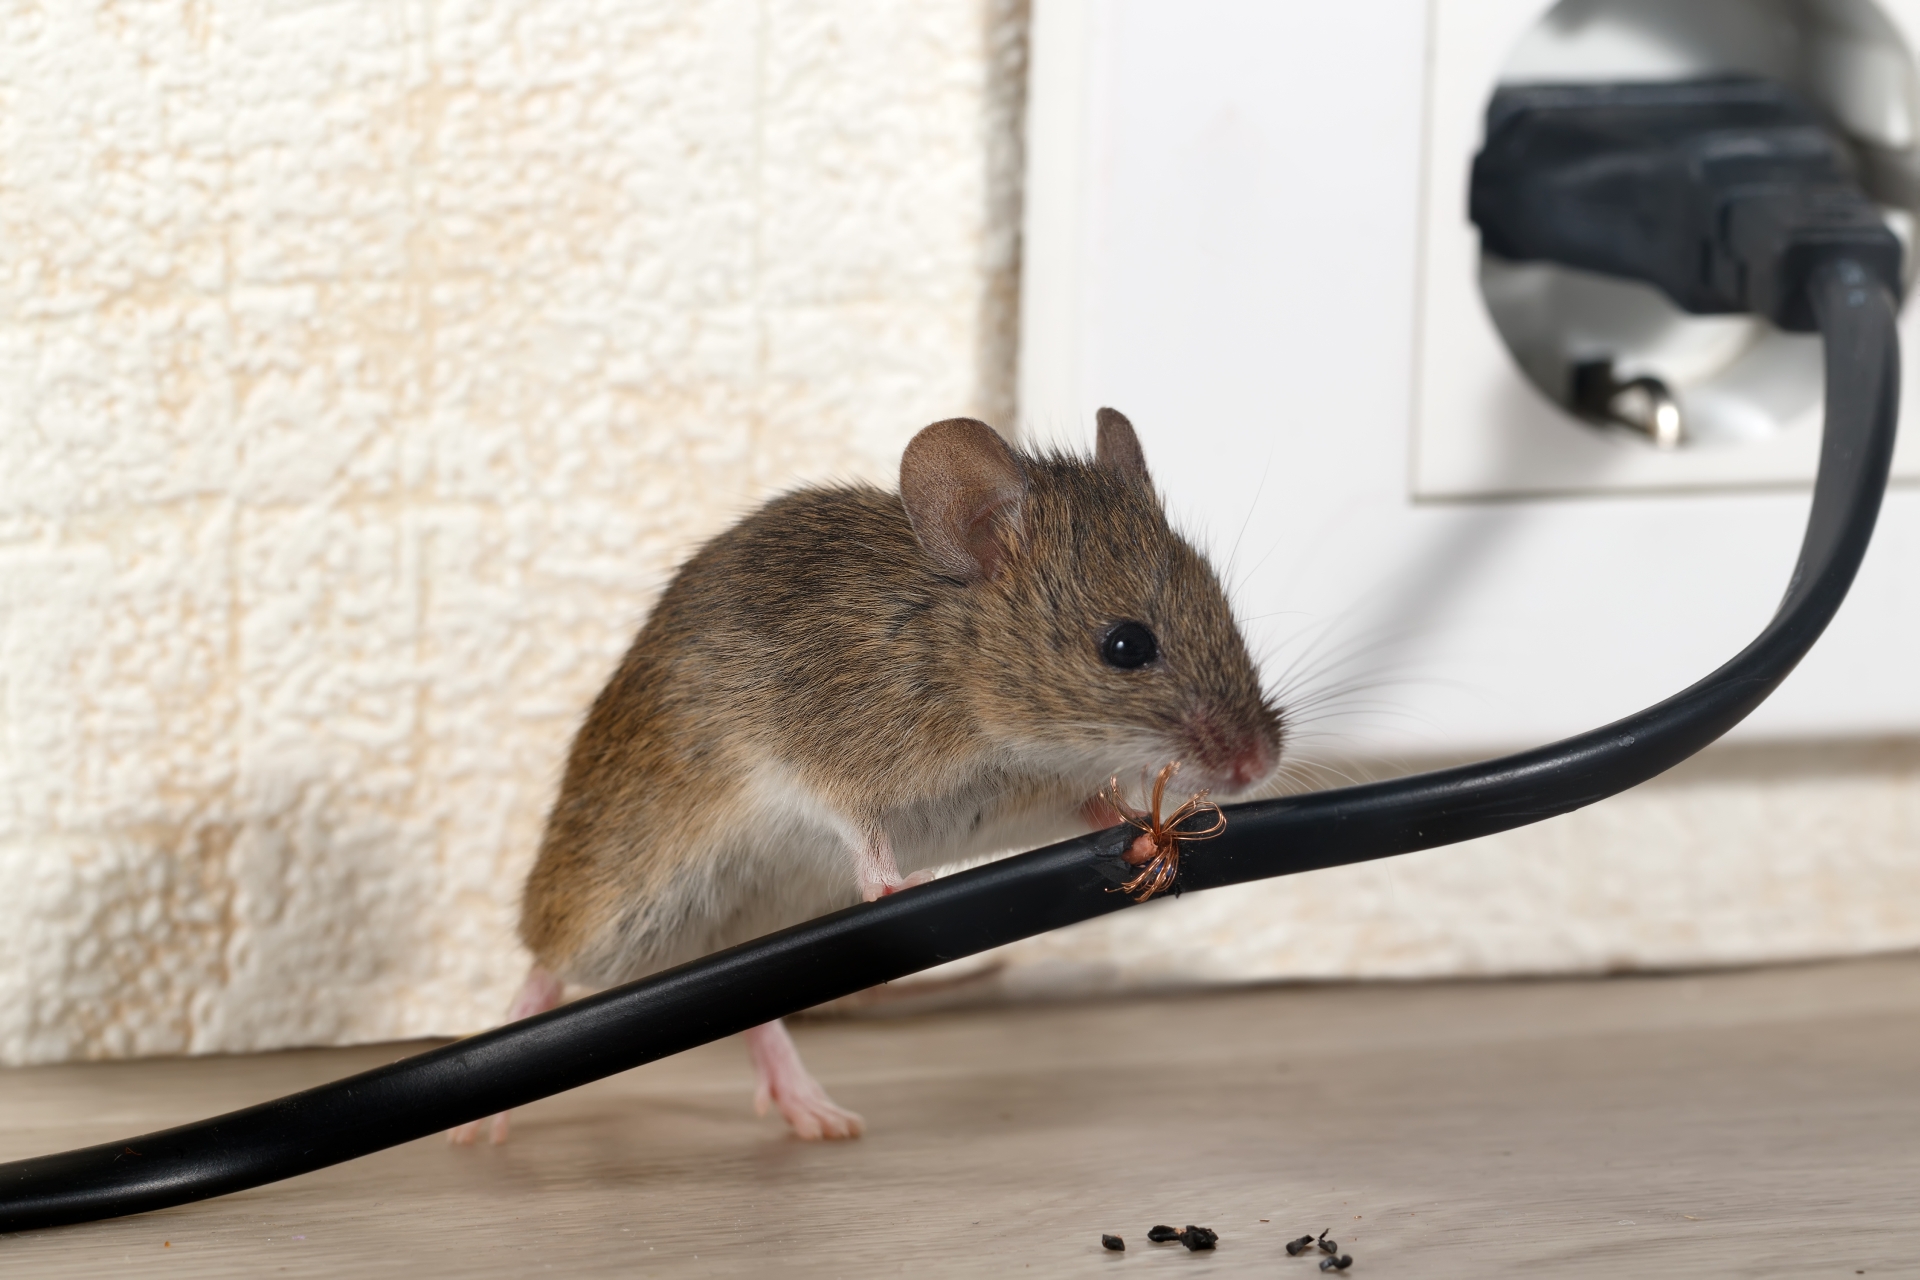 Mice Infestation, Pest Control in Chingford, Highams Park, E4. Call Now 020 8166 9746